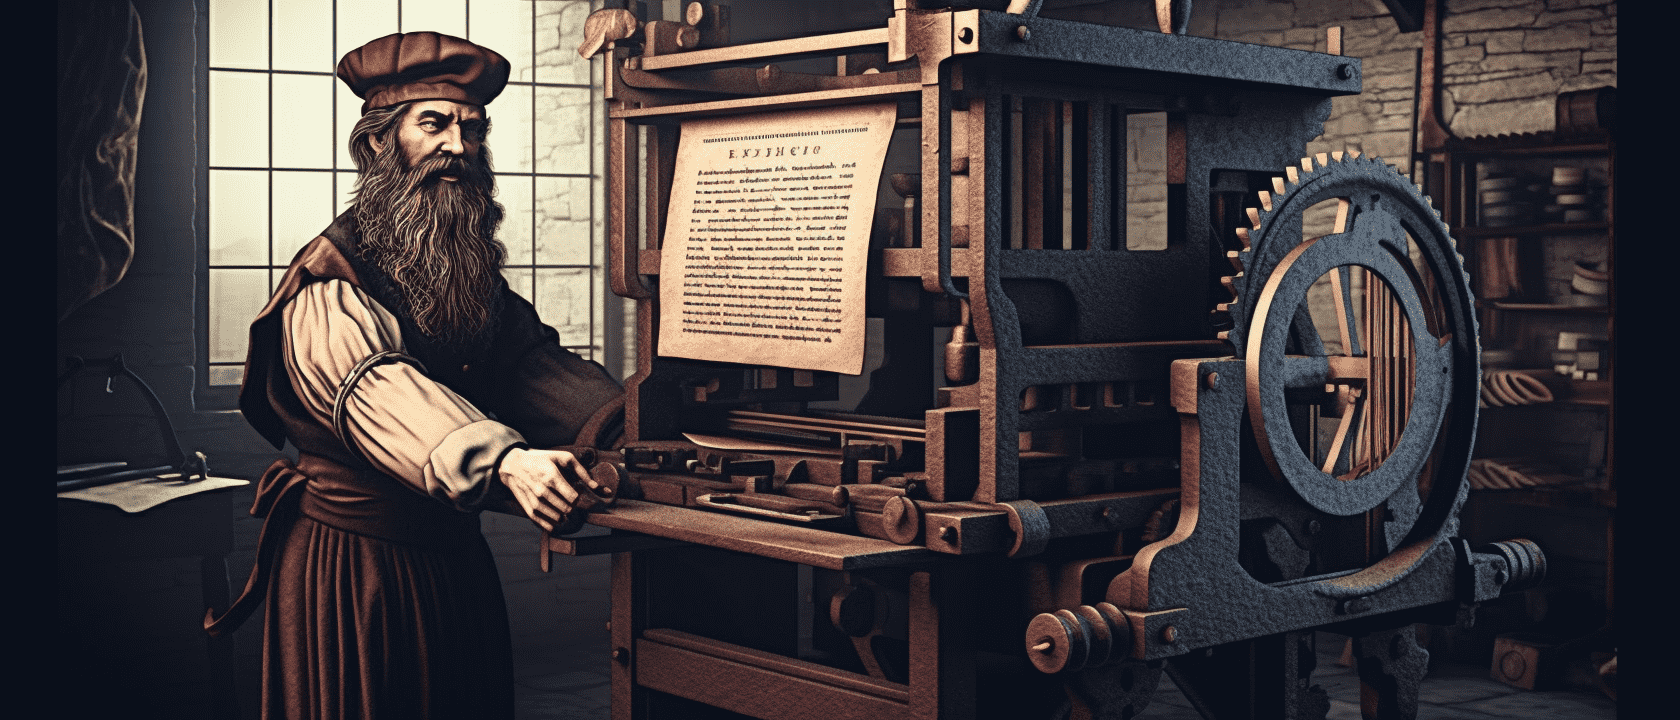 Gutenberg and his press concept